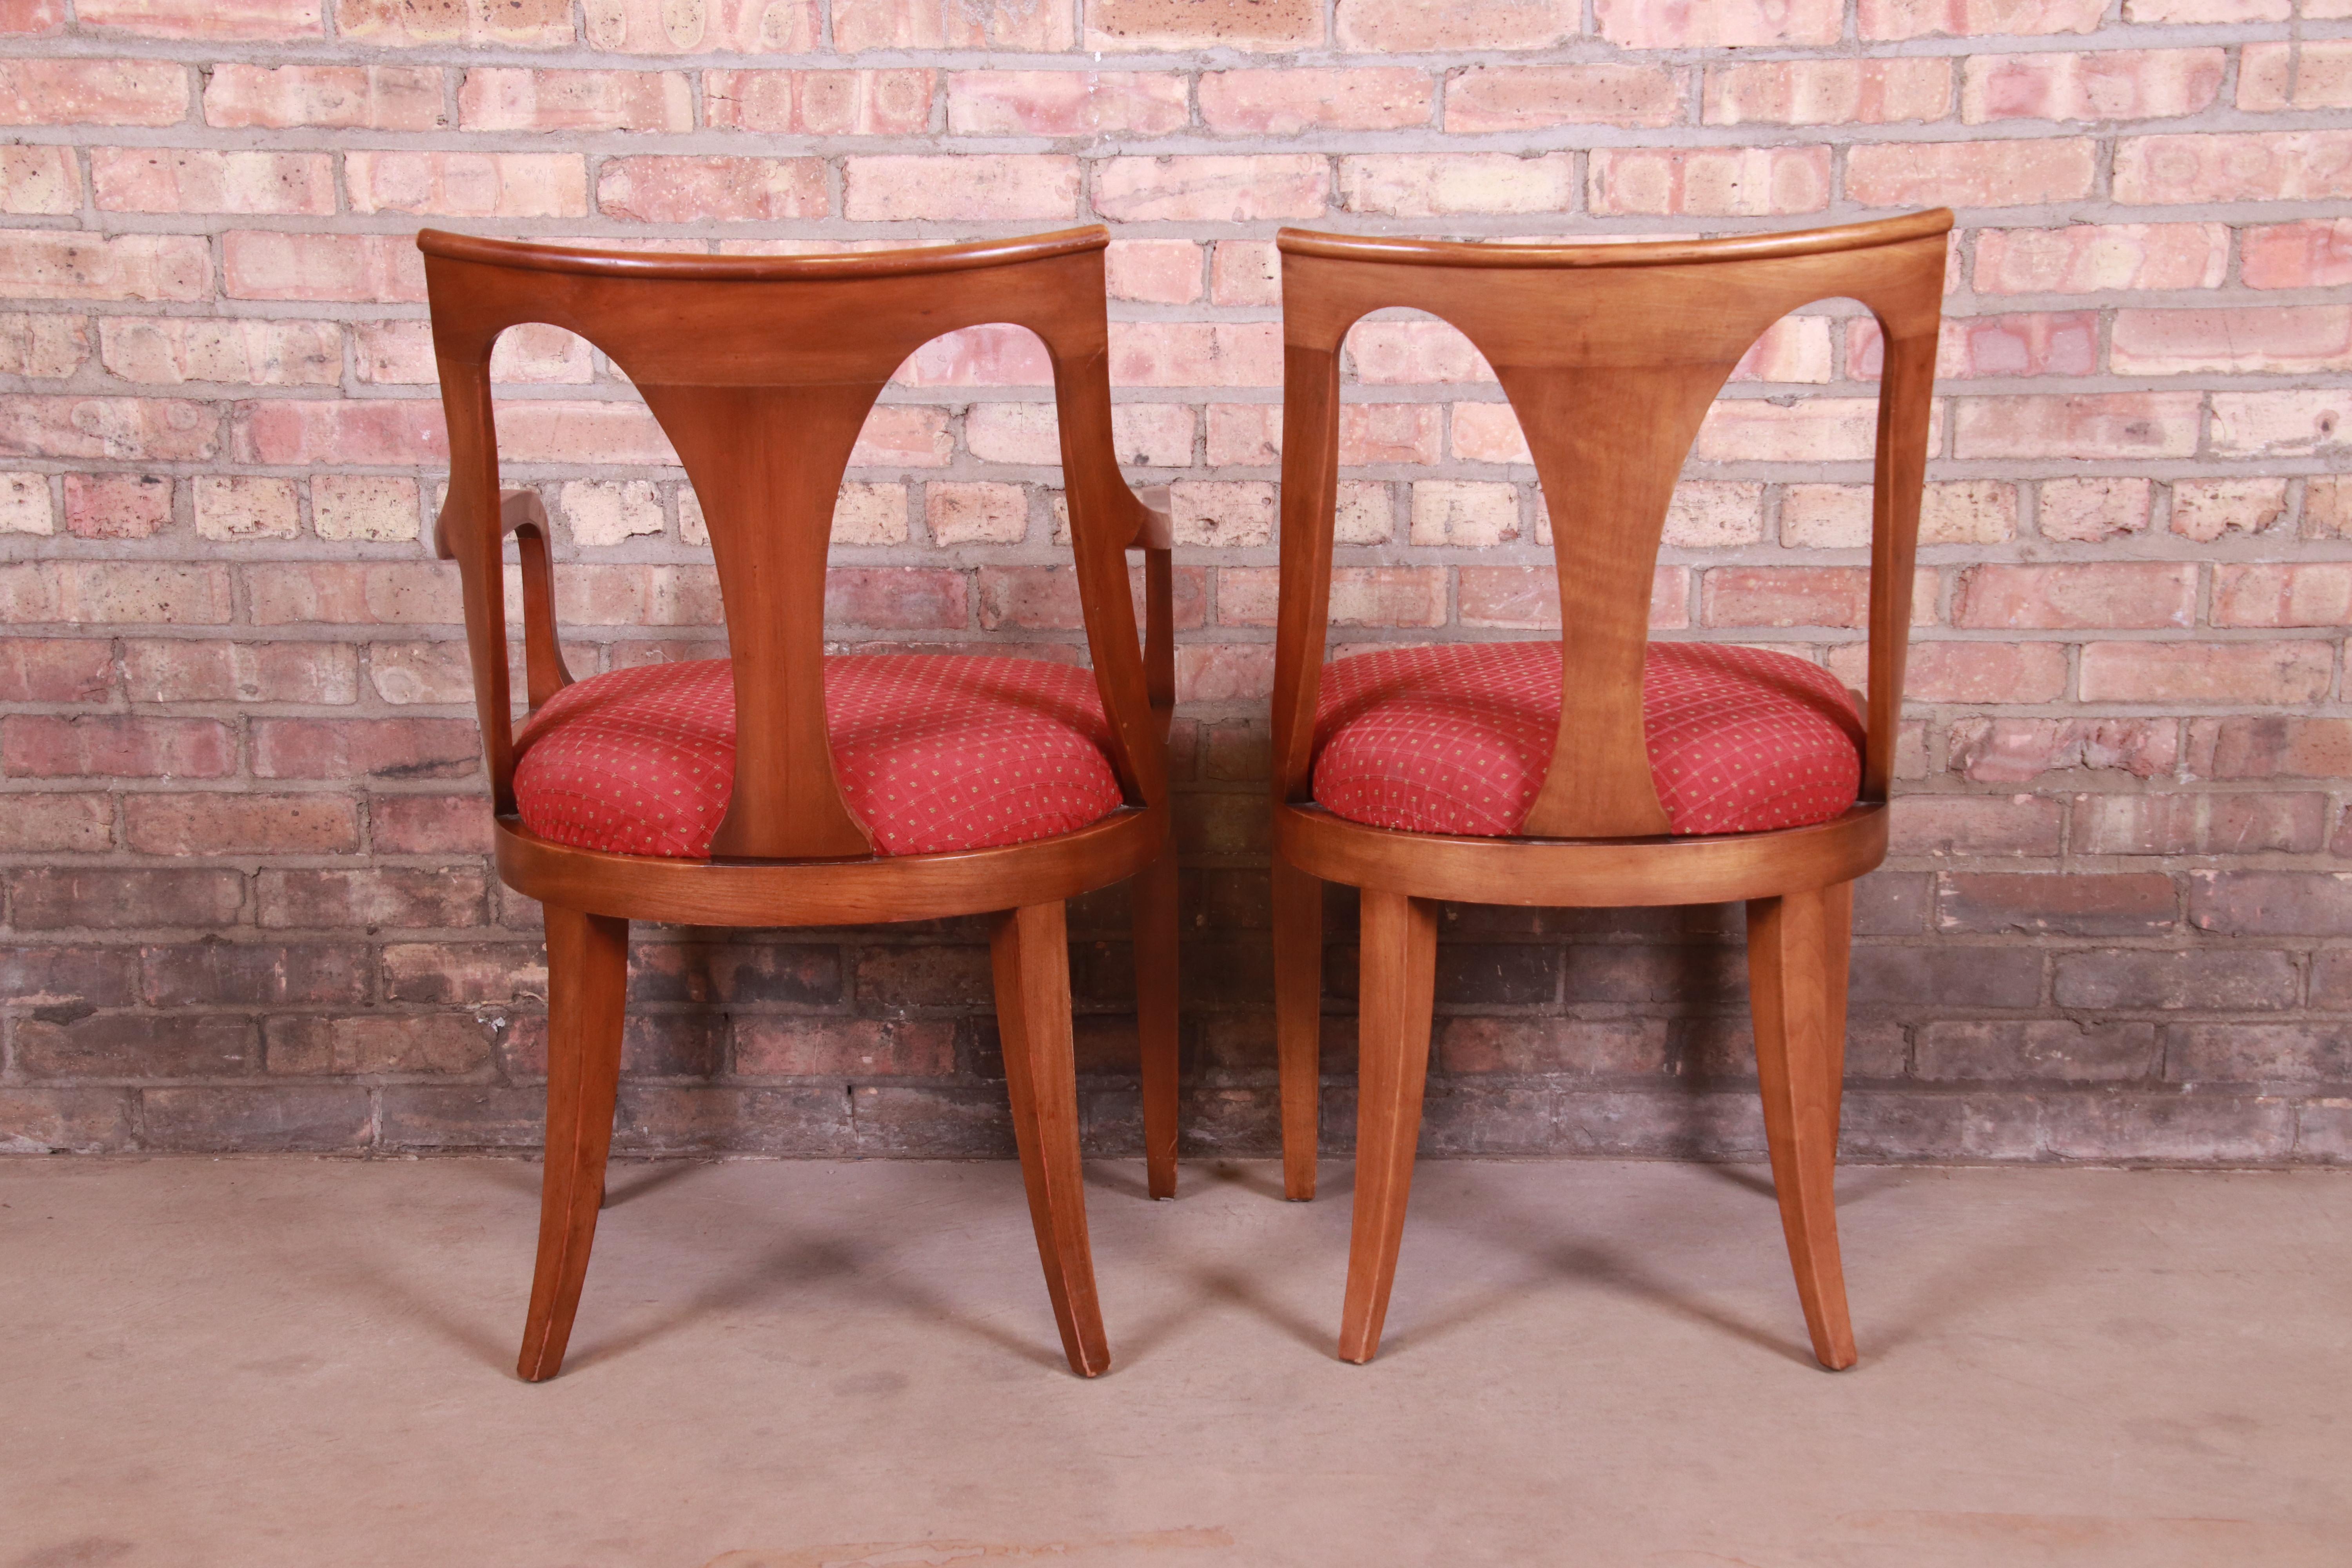 Kindel Furniture Regency Cherry Wood Dining Chairs, Set of Six 2